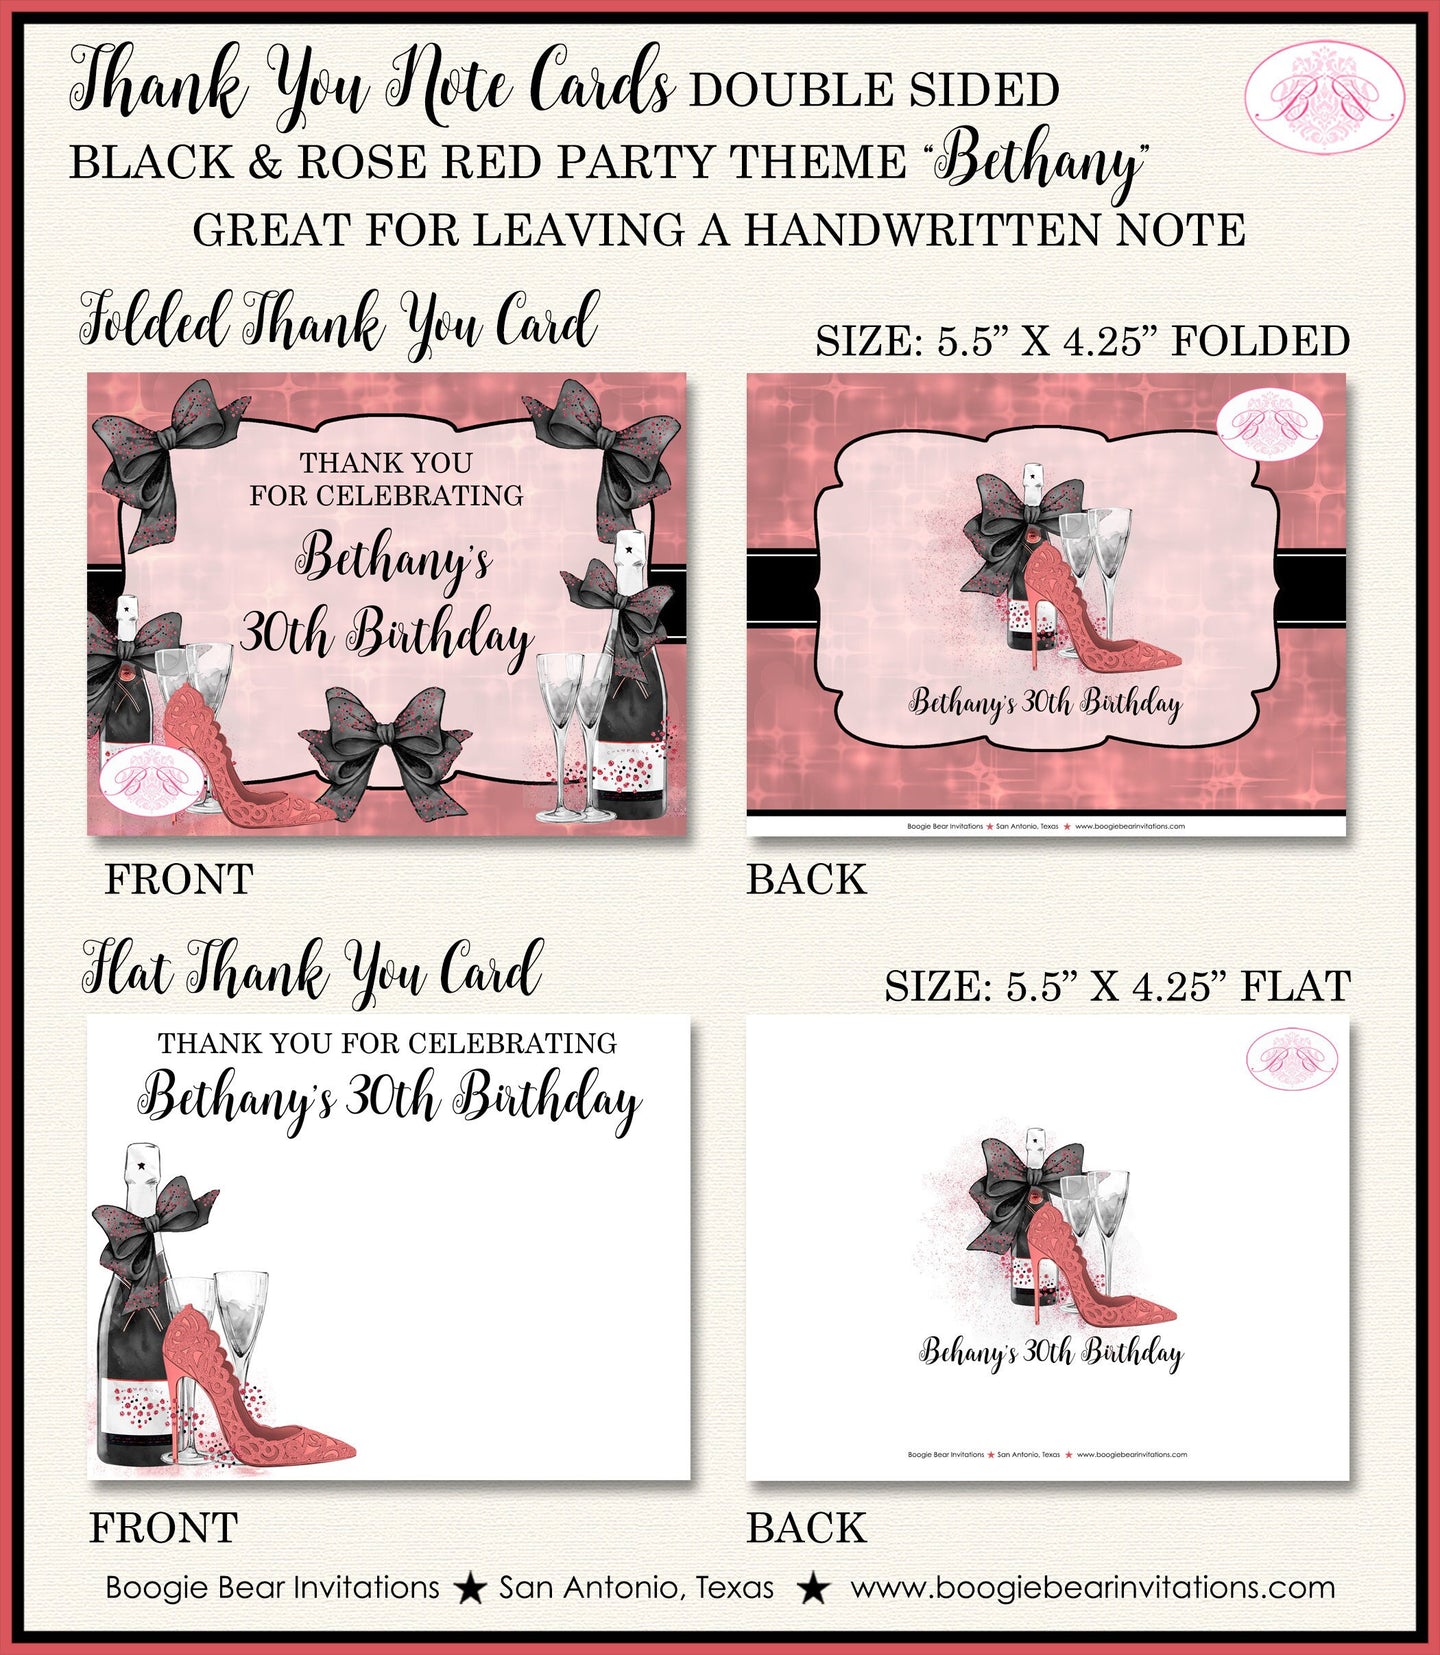 Pink Rose Gold Party Thank You Cards Birthday Note Champagne Red Black High Heels Fashion Chic Boogie Bear Invitations Bethany Theme Printed